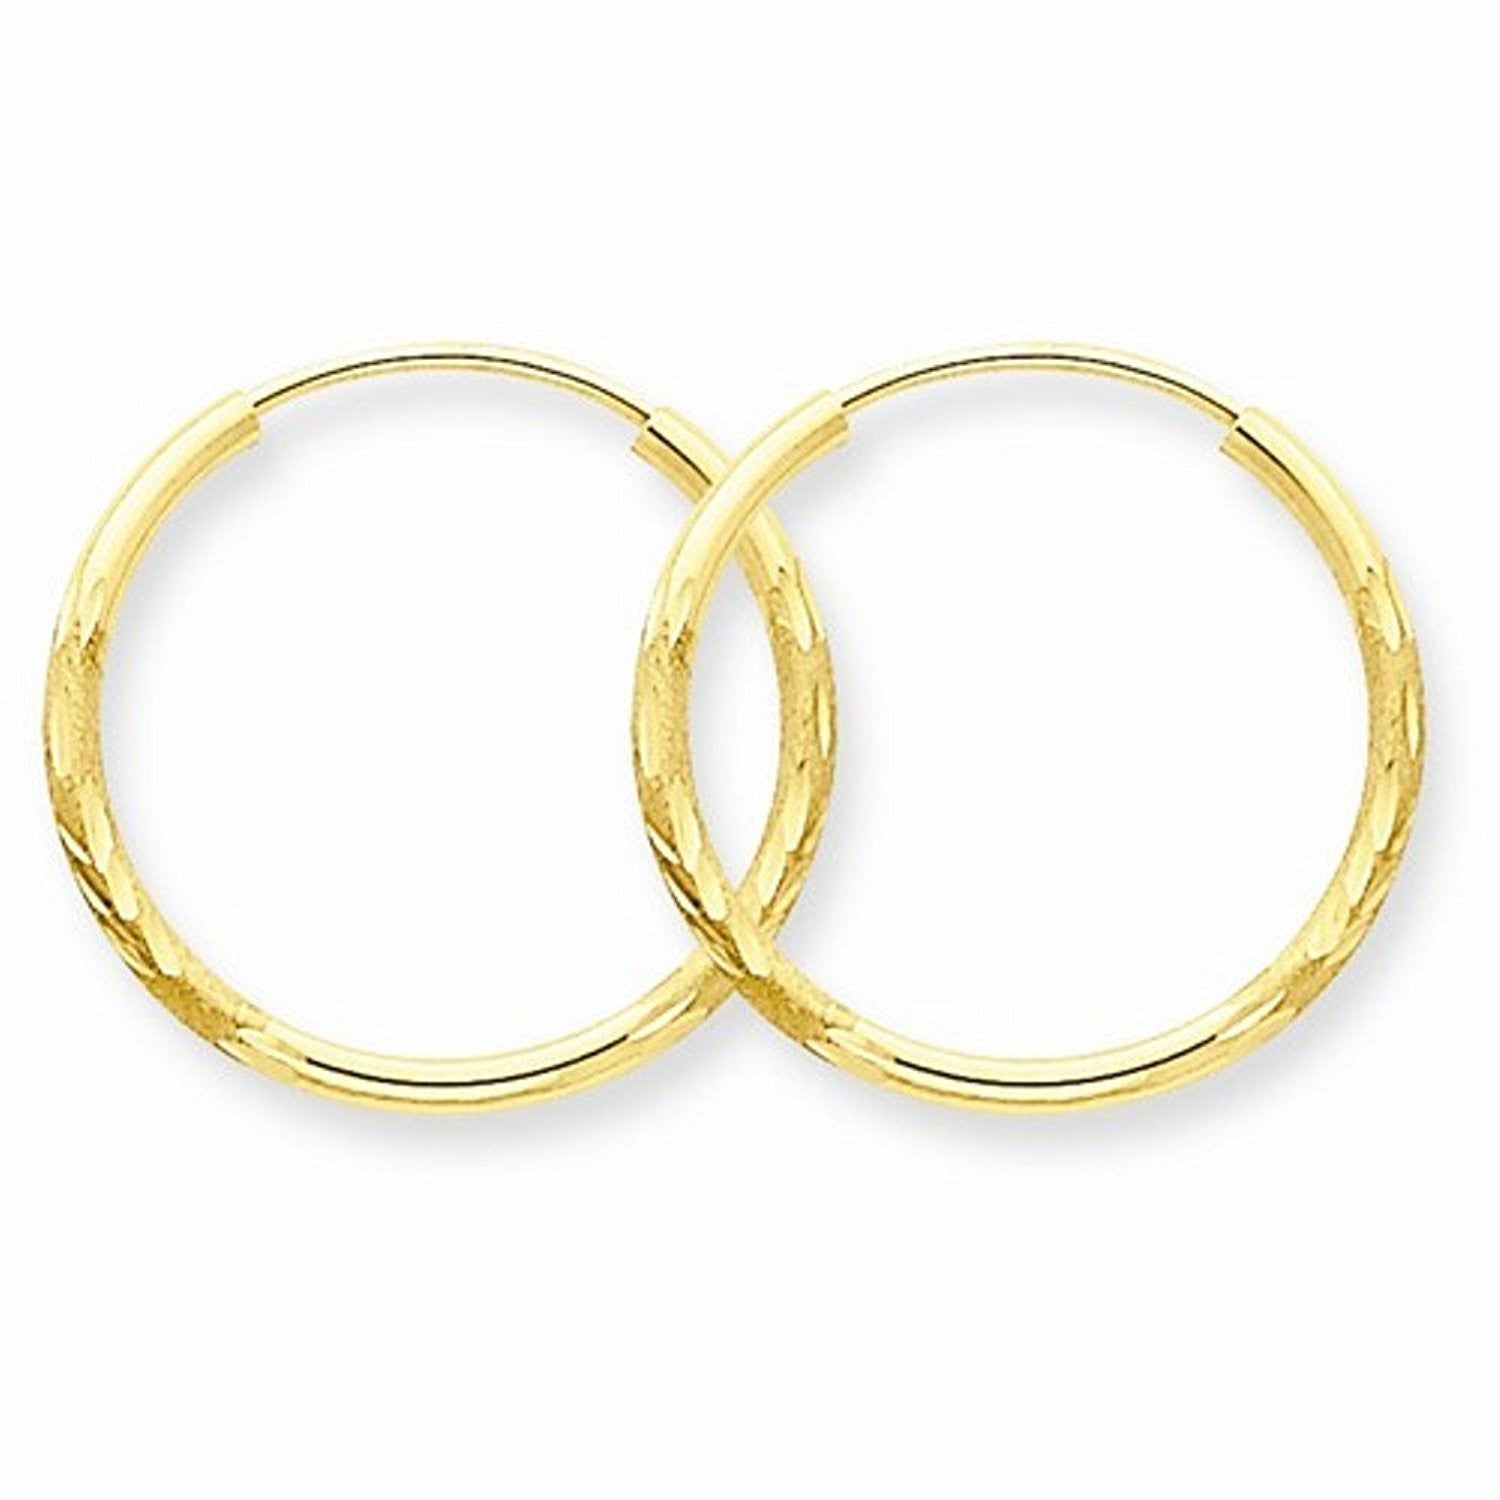 14K Yellow Gold 17mm x 1.5mm Round Endless Hoop Earrings